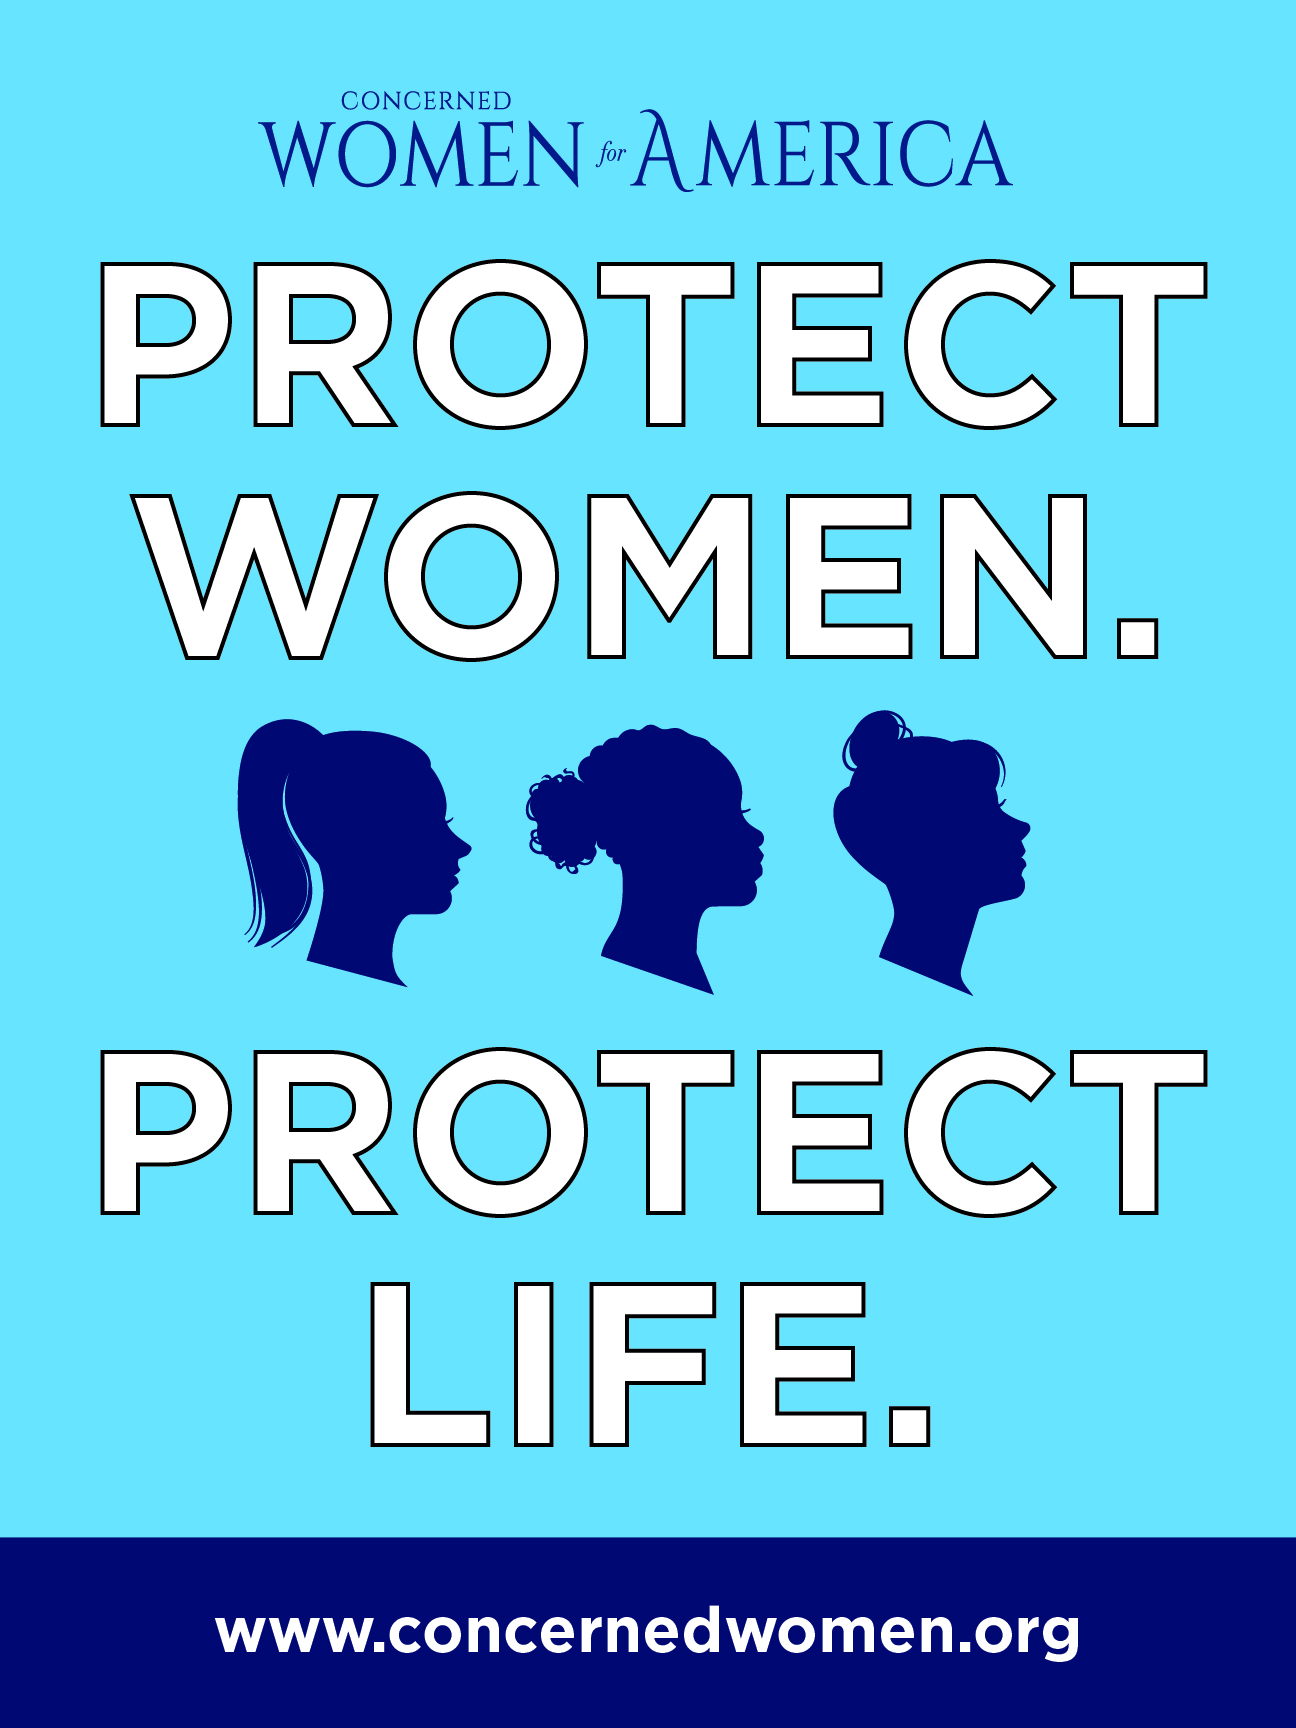 Concerned Women for America to add its voice to ‘Protect Women – Protect Life’ rally on steps of SCOTUS, Wednesday, March 4